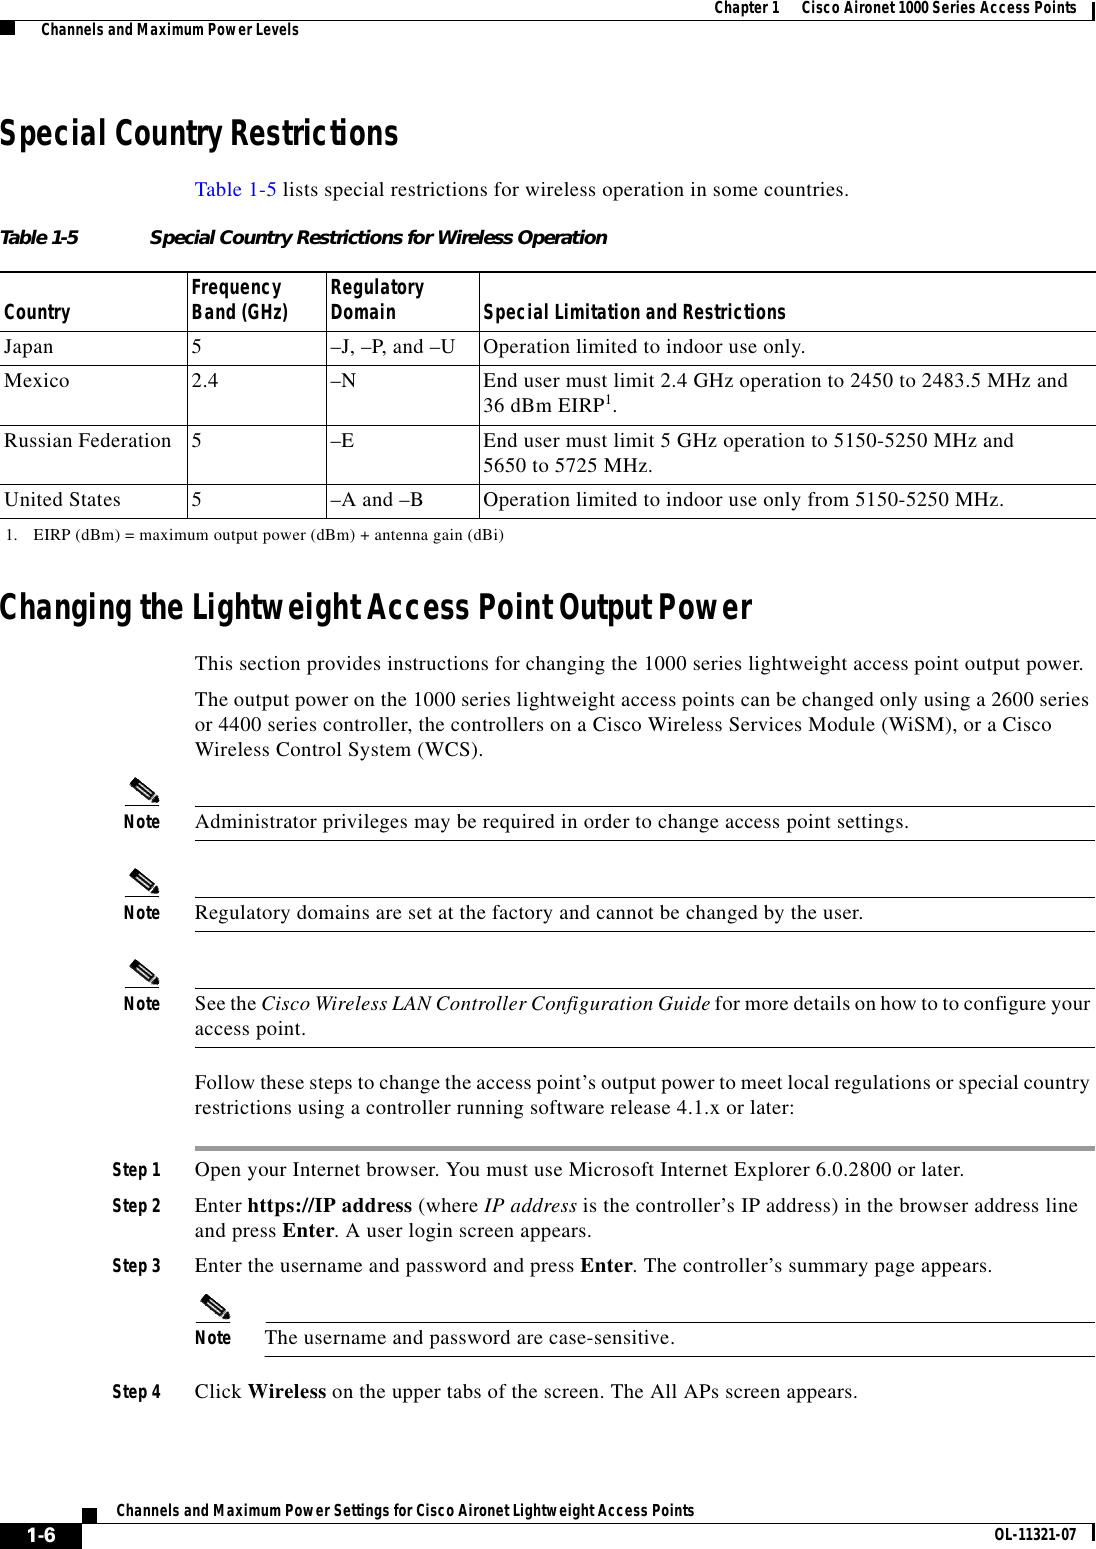  1-6Channels and Maximum Power Settings for Cisco Aironet Lightweight Access Points OL-11321-07Chapter 1      Cisco Aironet 1000 Series Access Points  Channels and Maximum Power LevelsSpecial Country RestrictionsTable 1-5 lists special restrictions for wireless operation in some countries. Changing the Lightweight Access Point Output PowerThis section provides instructions for changing the 1000 series lightweight access point output power. The output power on the 1000 series lightweight access points can be changed only using a 2600 series or 4400 series controller, the controllers on a Cisco Wireless Services Module (WiSM), or a Cisco Wireless Control System (WCS). Note Administrator privileges may be required in order to change access point settings.Note Regulatory domains are set at the factory and cannot be changed by the user.Note See the Cisco Wireless LAN Controller Configuration Guide for more details on how to to configure your access point.Follow these steps to change the access point’s output power to meet local regulations or special country restrictions using a controller running software release 4.1.x or later: Step 1 Open your Internet browser. You must use Microsoft Internet Explorer 6.0.2800 or later.Step 2 Enter https://IP address (where IP address is the controller’s IP address) in the browser address line and press Enter. A user login screen appears.Step 3 Enter the username and password and press Enter. The controller’s summary page appears.Note The username and password are case-sensitive.Step 4 Click Wireless on the upper tabs of the screen. The All APs screen appears.Table 1-5 Special Country Restrictions for Wireless OperationCountry Frequency Band (GHz) Regulatory Domain Special Limitation and RestrictionsJapan 5–J, –P, and –U Operation limited to indoor use only.Mexico 2.4  –N End user must limit 2.4 GHz operation to 2450 to 2483.5 MHz and  36 dBm EIRP1.1. EIRP (dBm) = maximum output power (dBm) + antenna gain (dBi)Russian Federation 5–E End user must limit 5 GHz operation to 5150-5250 MHz and  5650 to 5725 MHz.United States 5  –A and –B  Operation limited to indoor use only from 5150-5250 MHz.